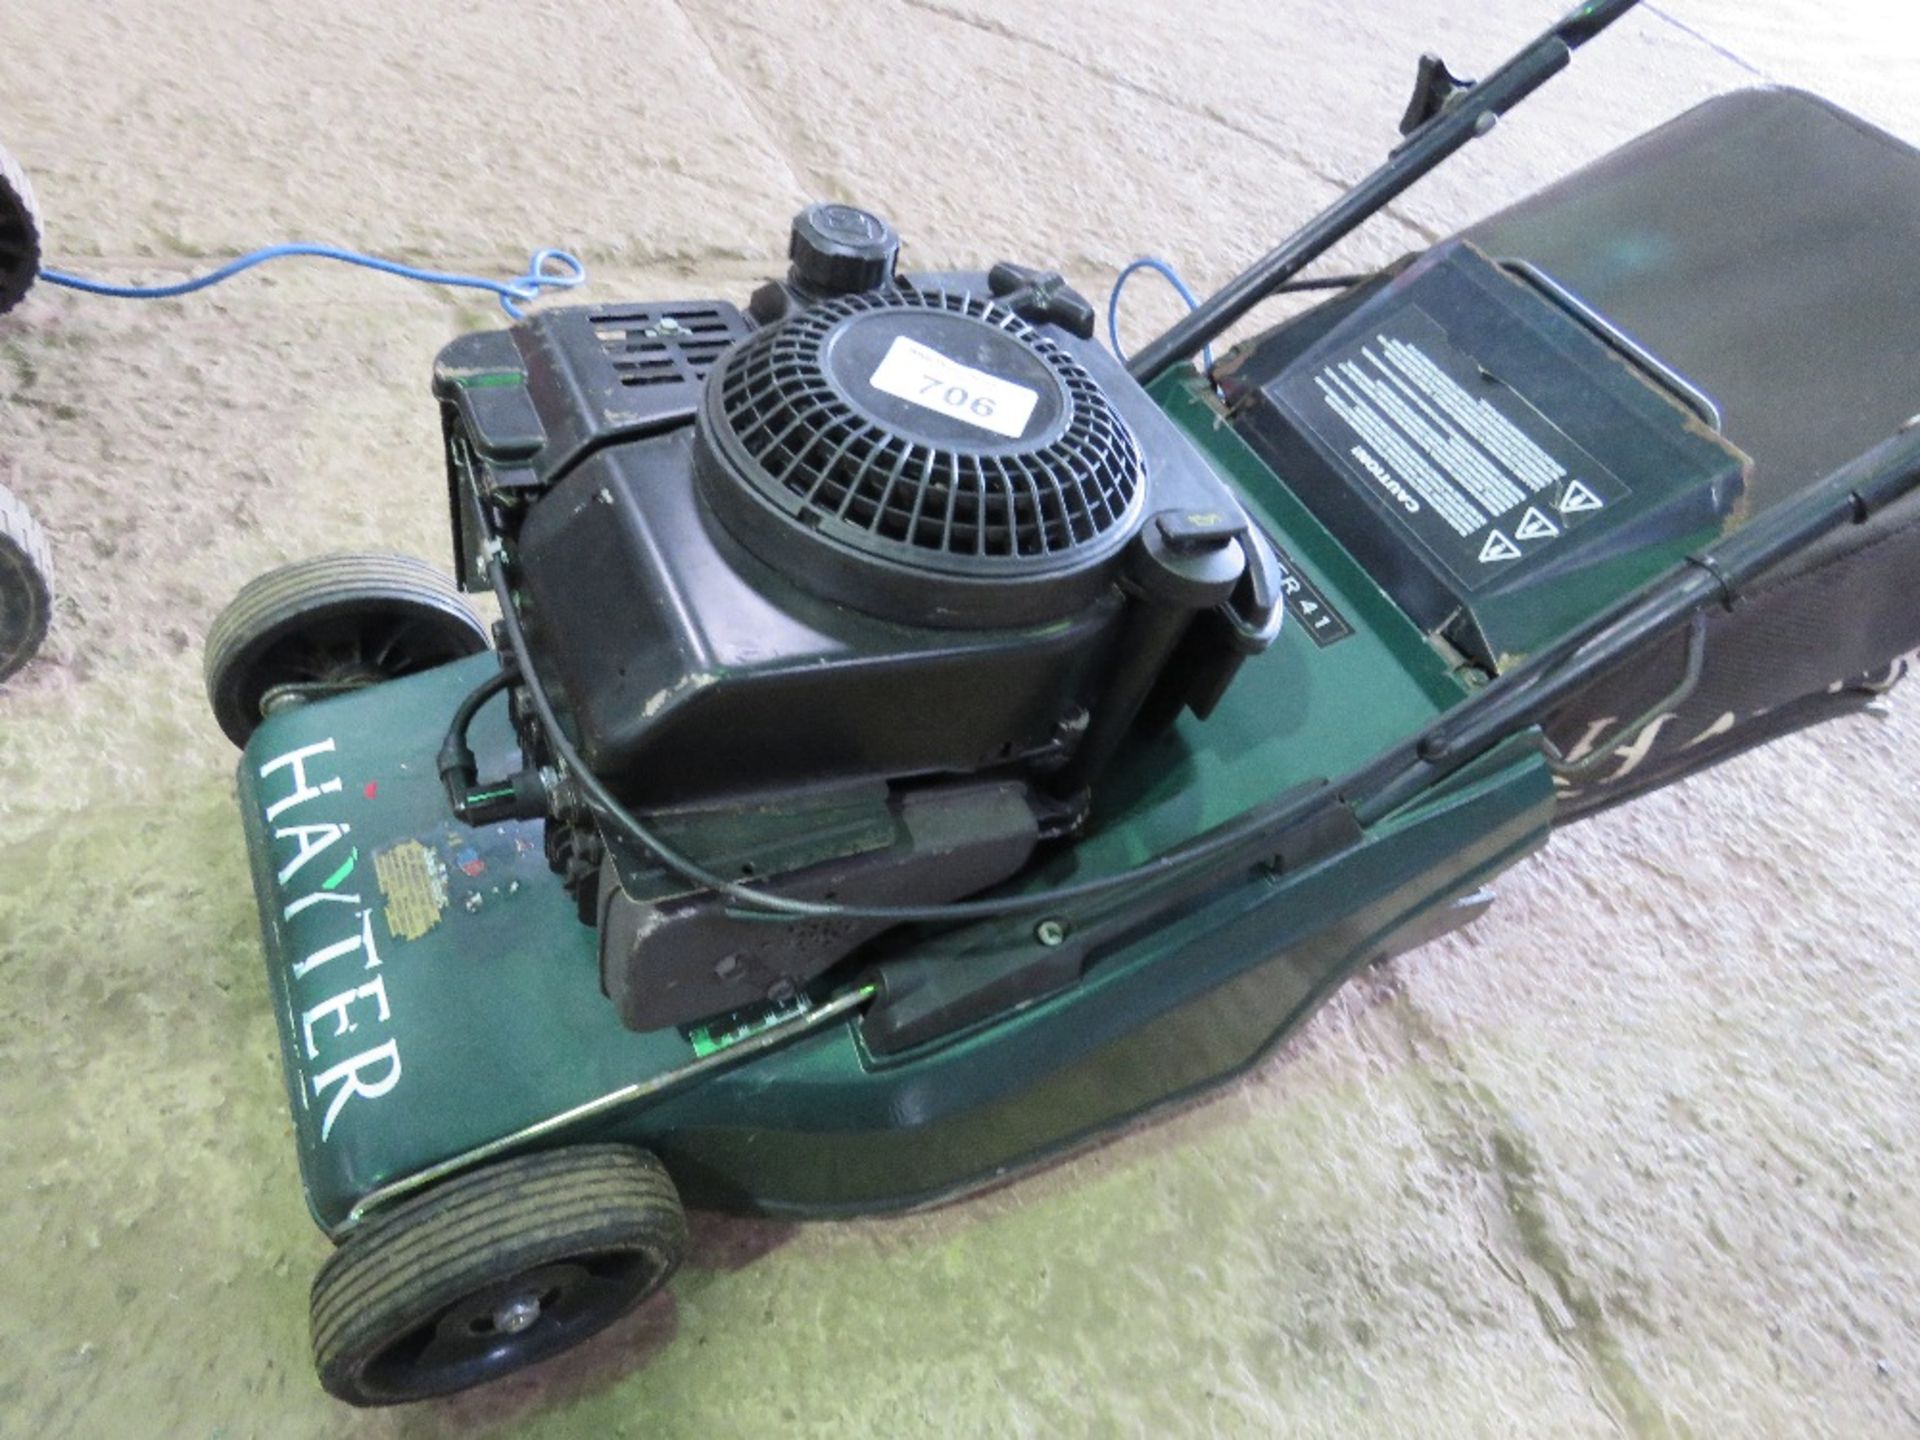 HAYTER HARRIER 41 ROLLER TYPE PETROL ENGINED LAWNMOWER, WITH COLLECTOR. THIS LOT IS SOLD UNDER T